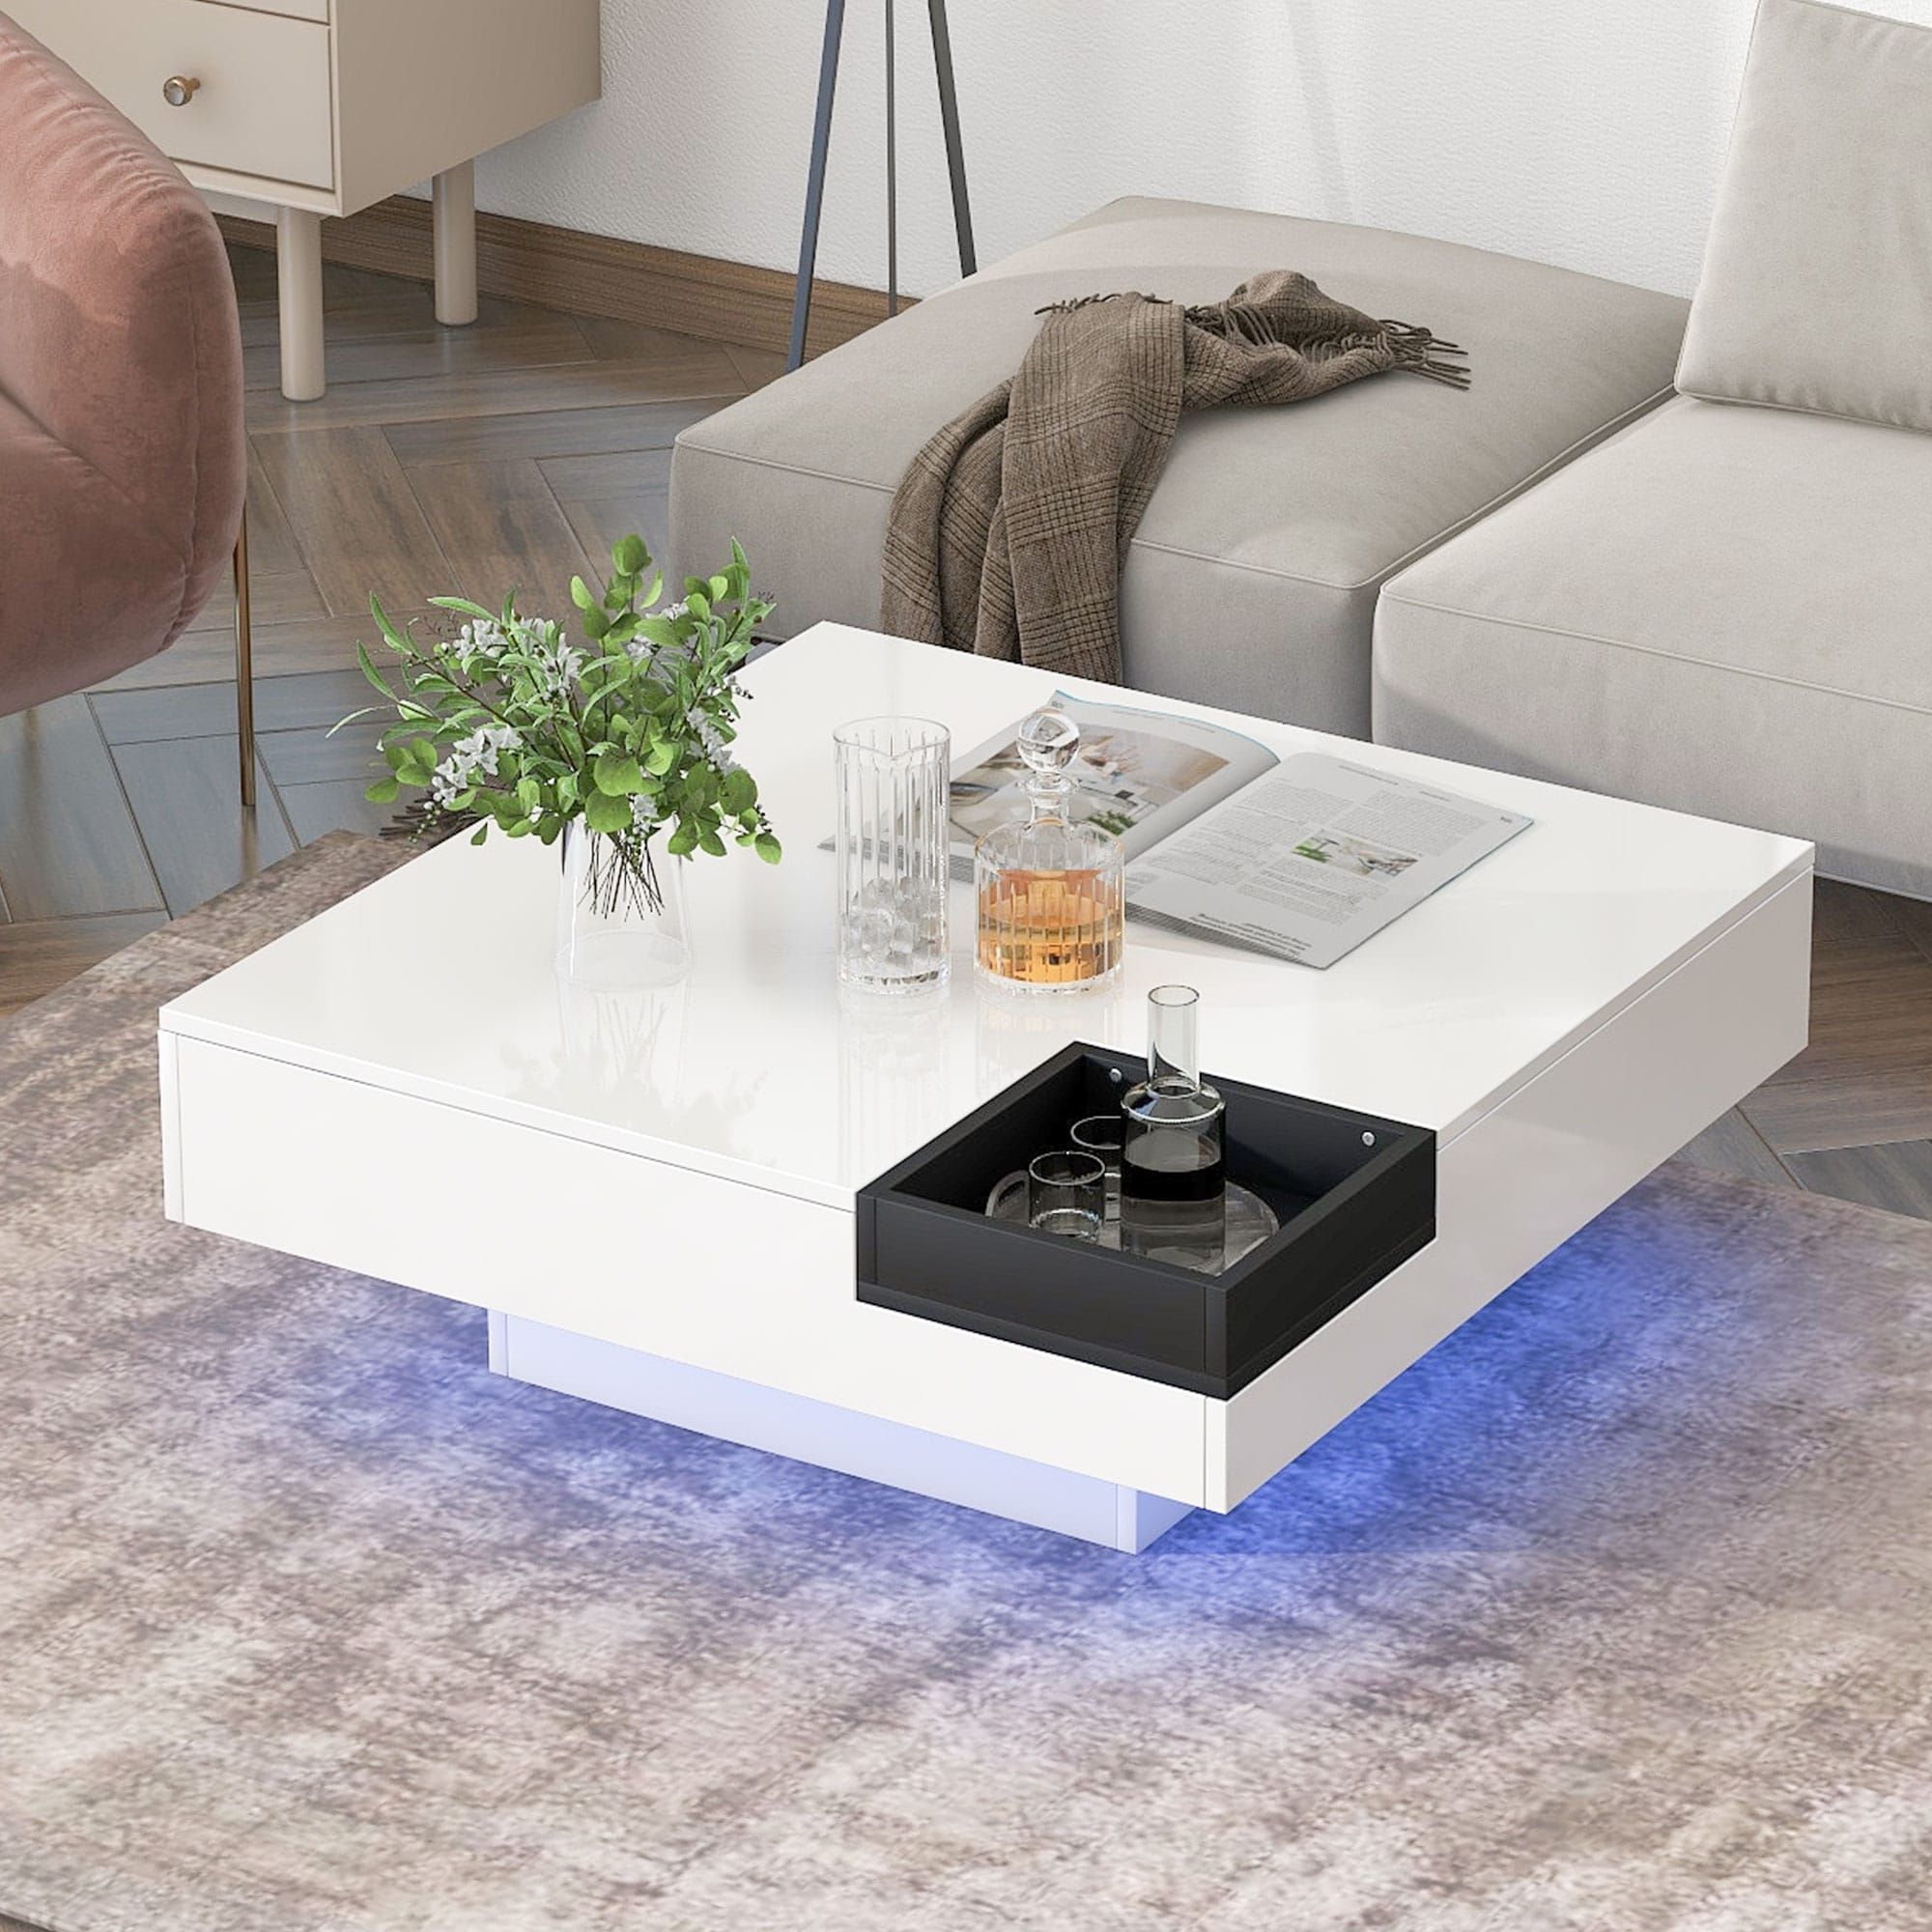 Minimalist Design Square Coffee Table With Detachable Tray And Plug In  16 Color Led Strip Lights Remote Control For Living Room – Bed Bath &  Beyond – 37366809 Within Detachable Tray Coffee Tables (View 4 of 15)